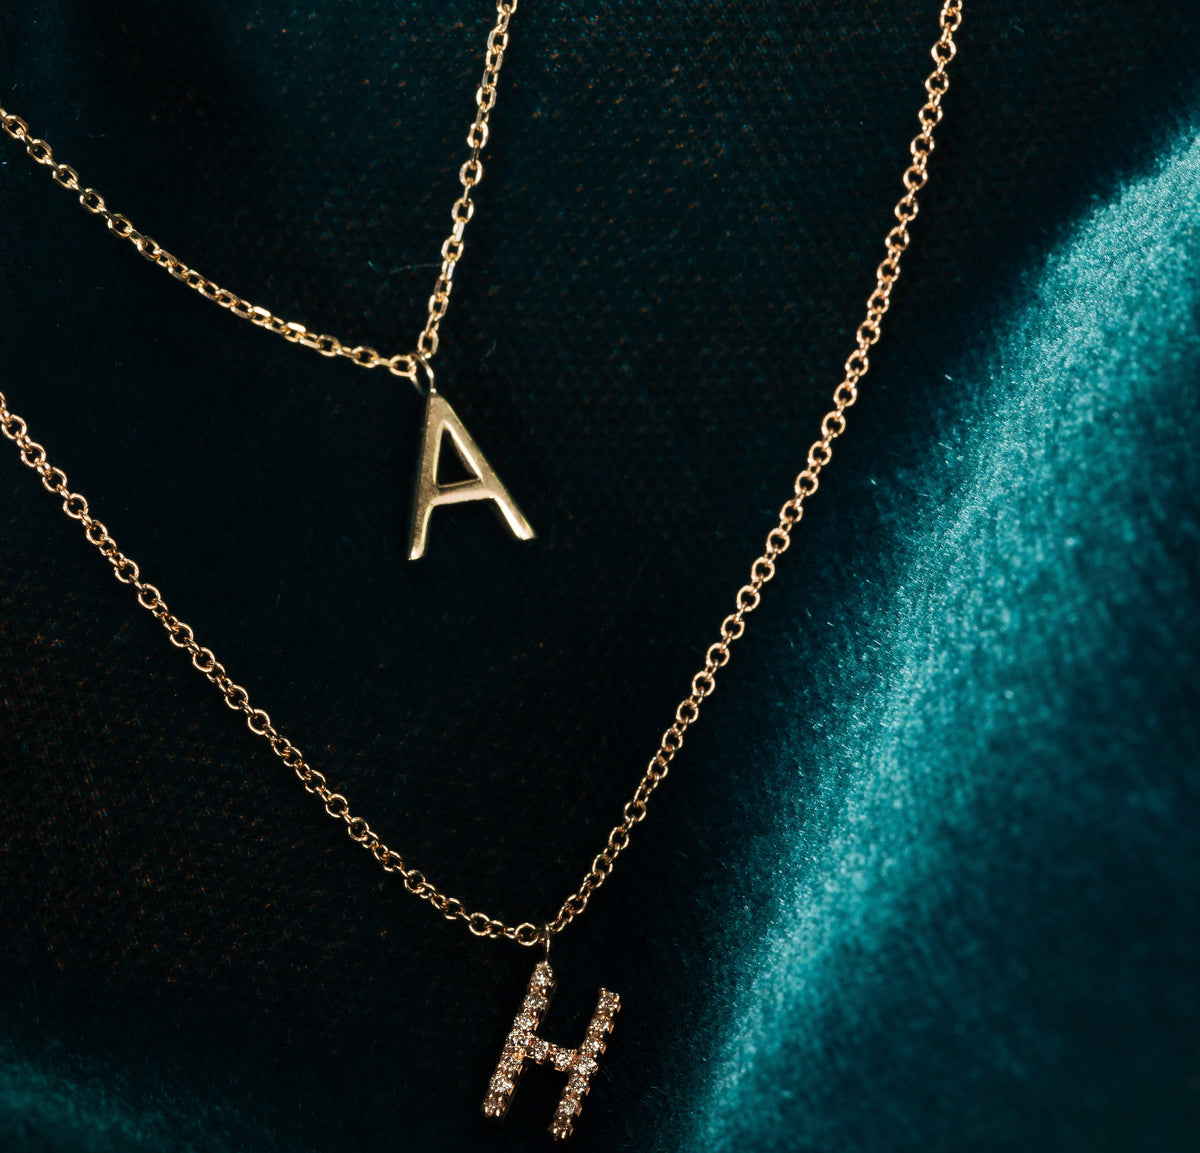 Aurate New York Classic Gold Letter Necklace